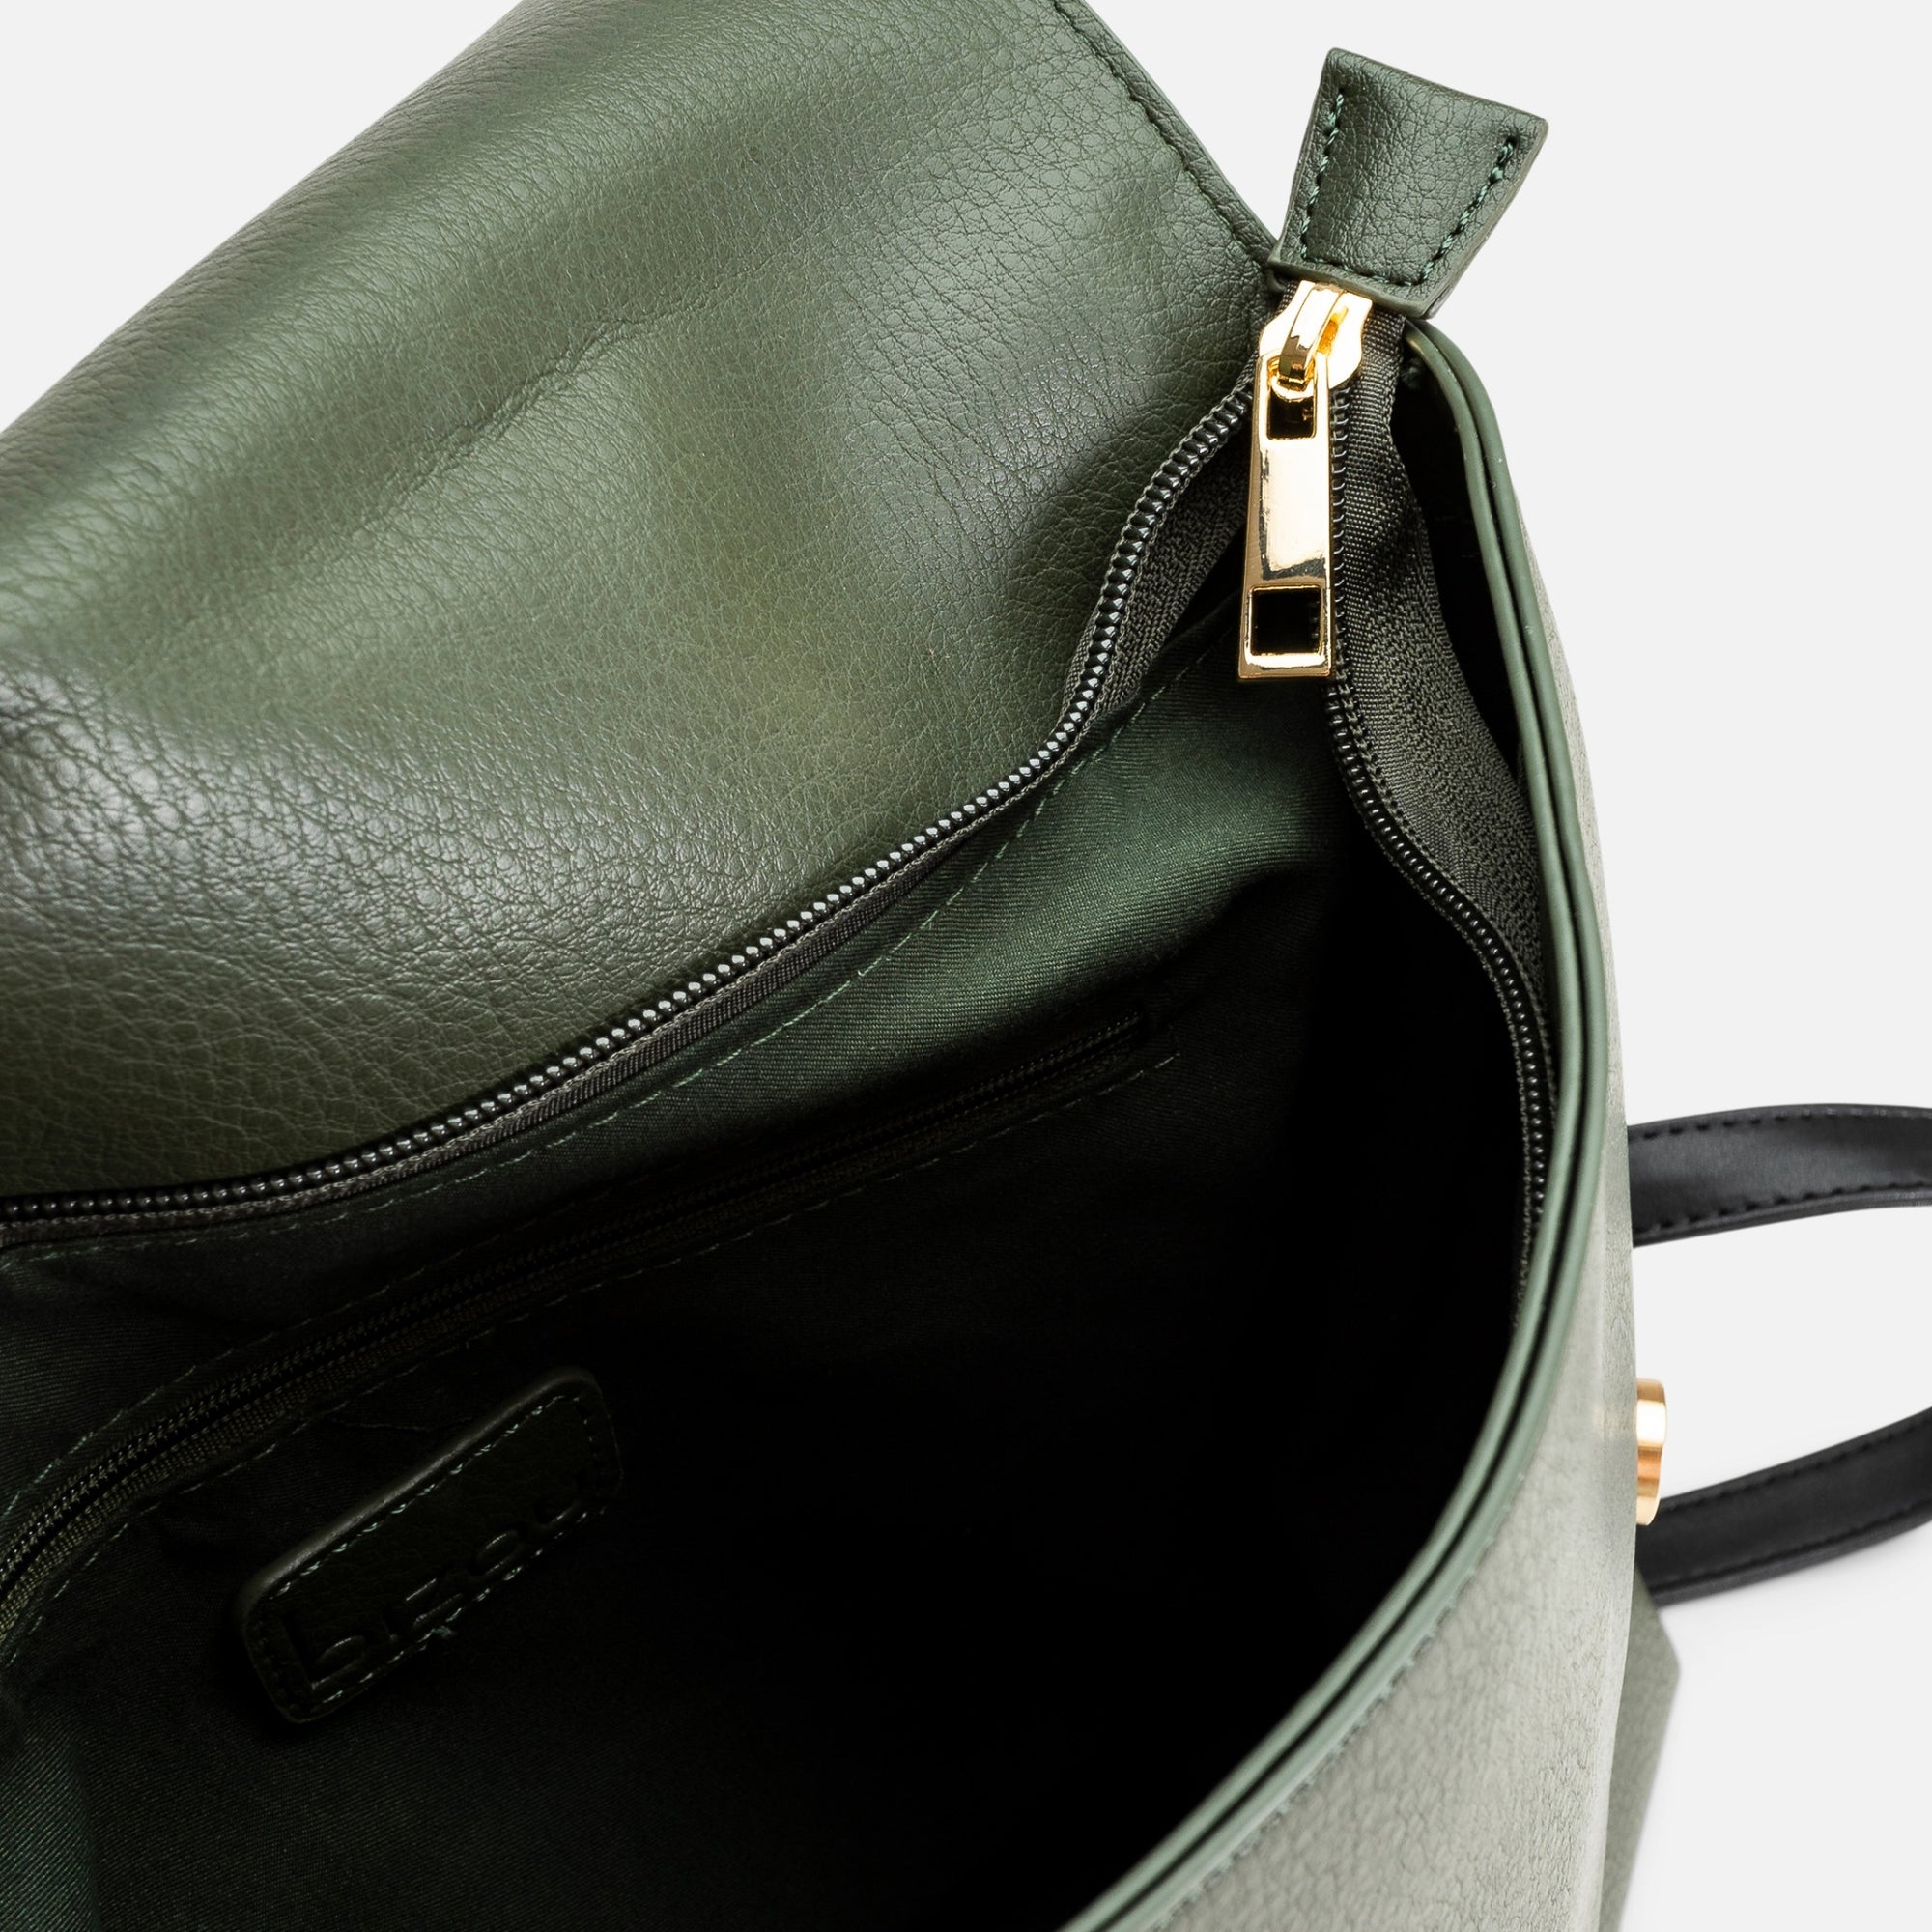 Dark green backpack with large flap and black handle